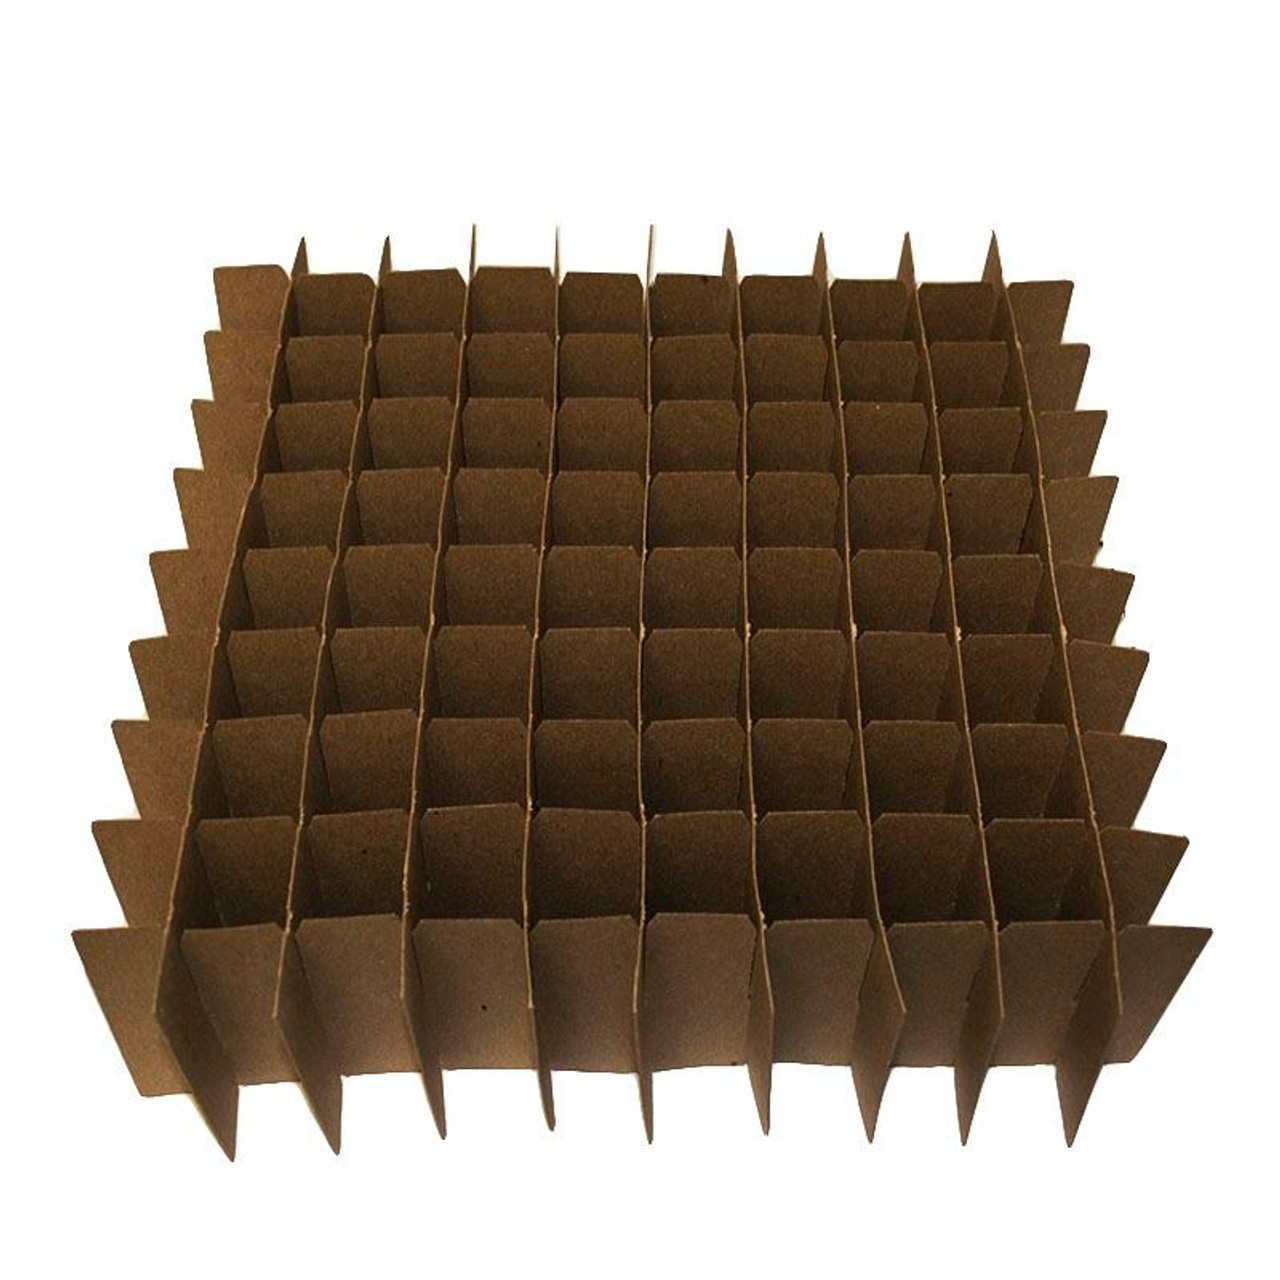 https://cdn11.bigcommerce.com/s-w60s75xh/images/stencil/1280x1280/products/983/3956/Corrugated_100_Dividers_Fits_100_1_oz.__71522.1654526515.jpg?c=2